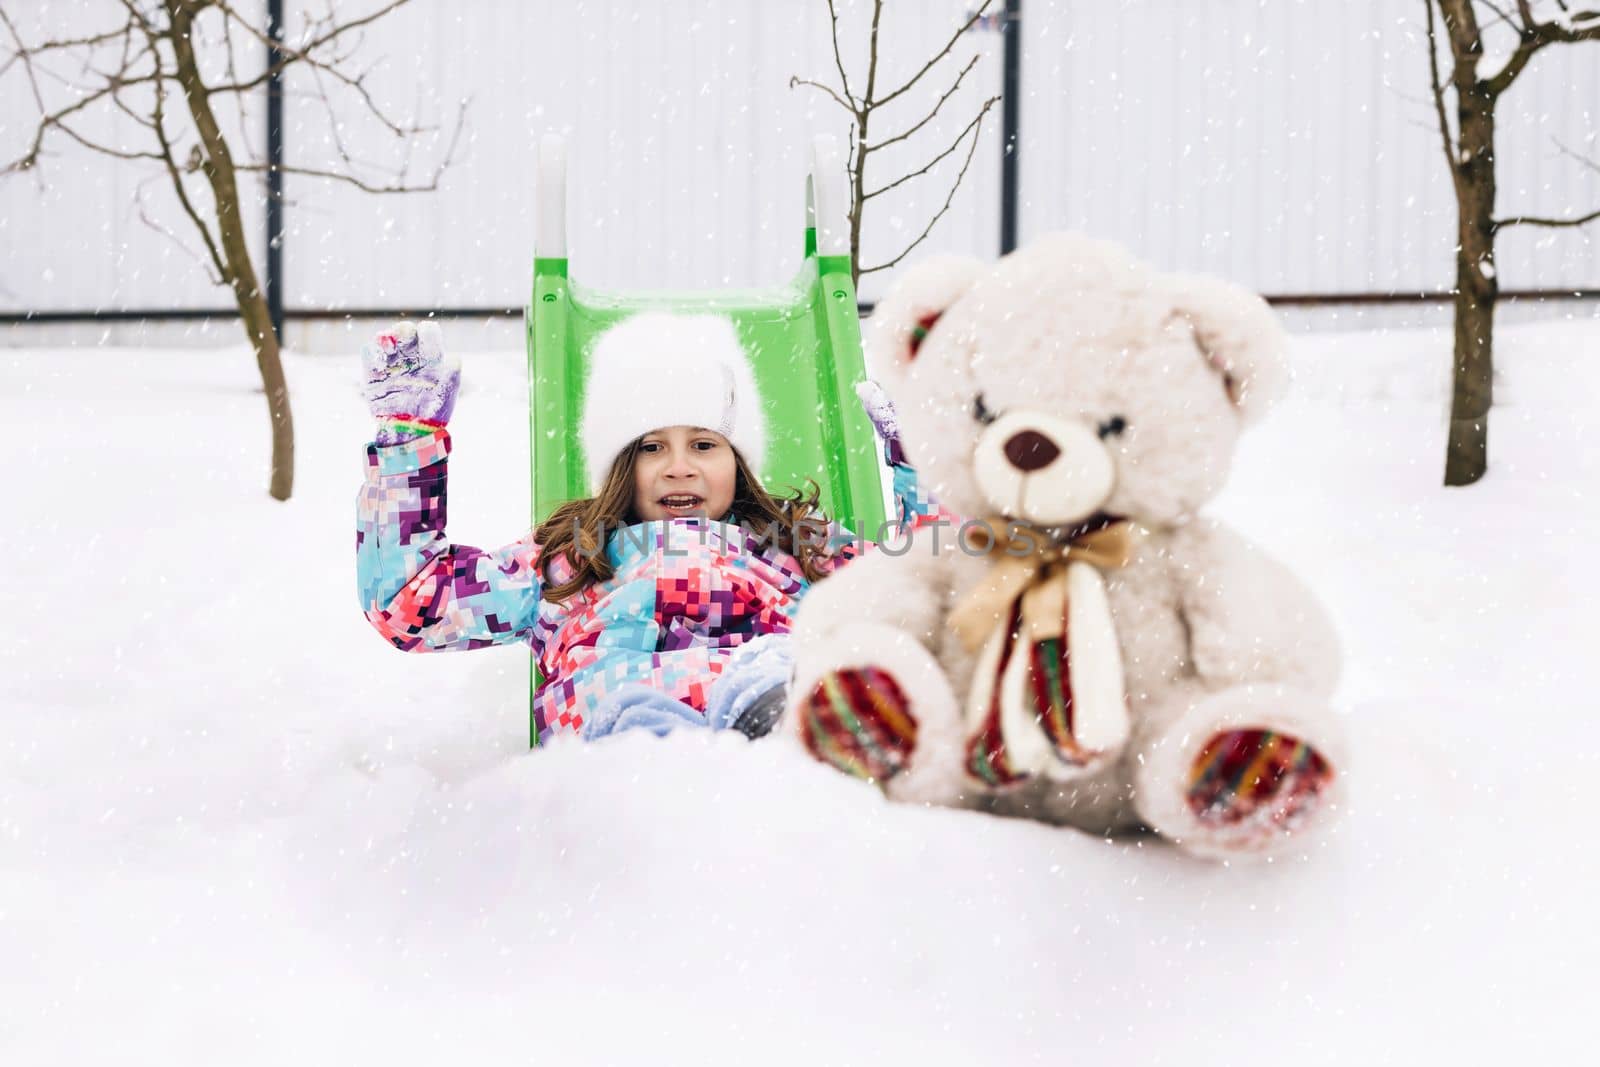 Cute toddler girl playing with teddy bear in winter park. Winter portrait of little caucasian child girl. Outdoor winter activities for kids.